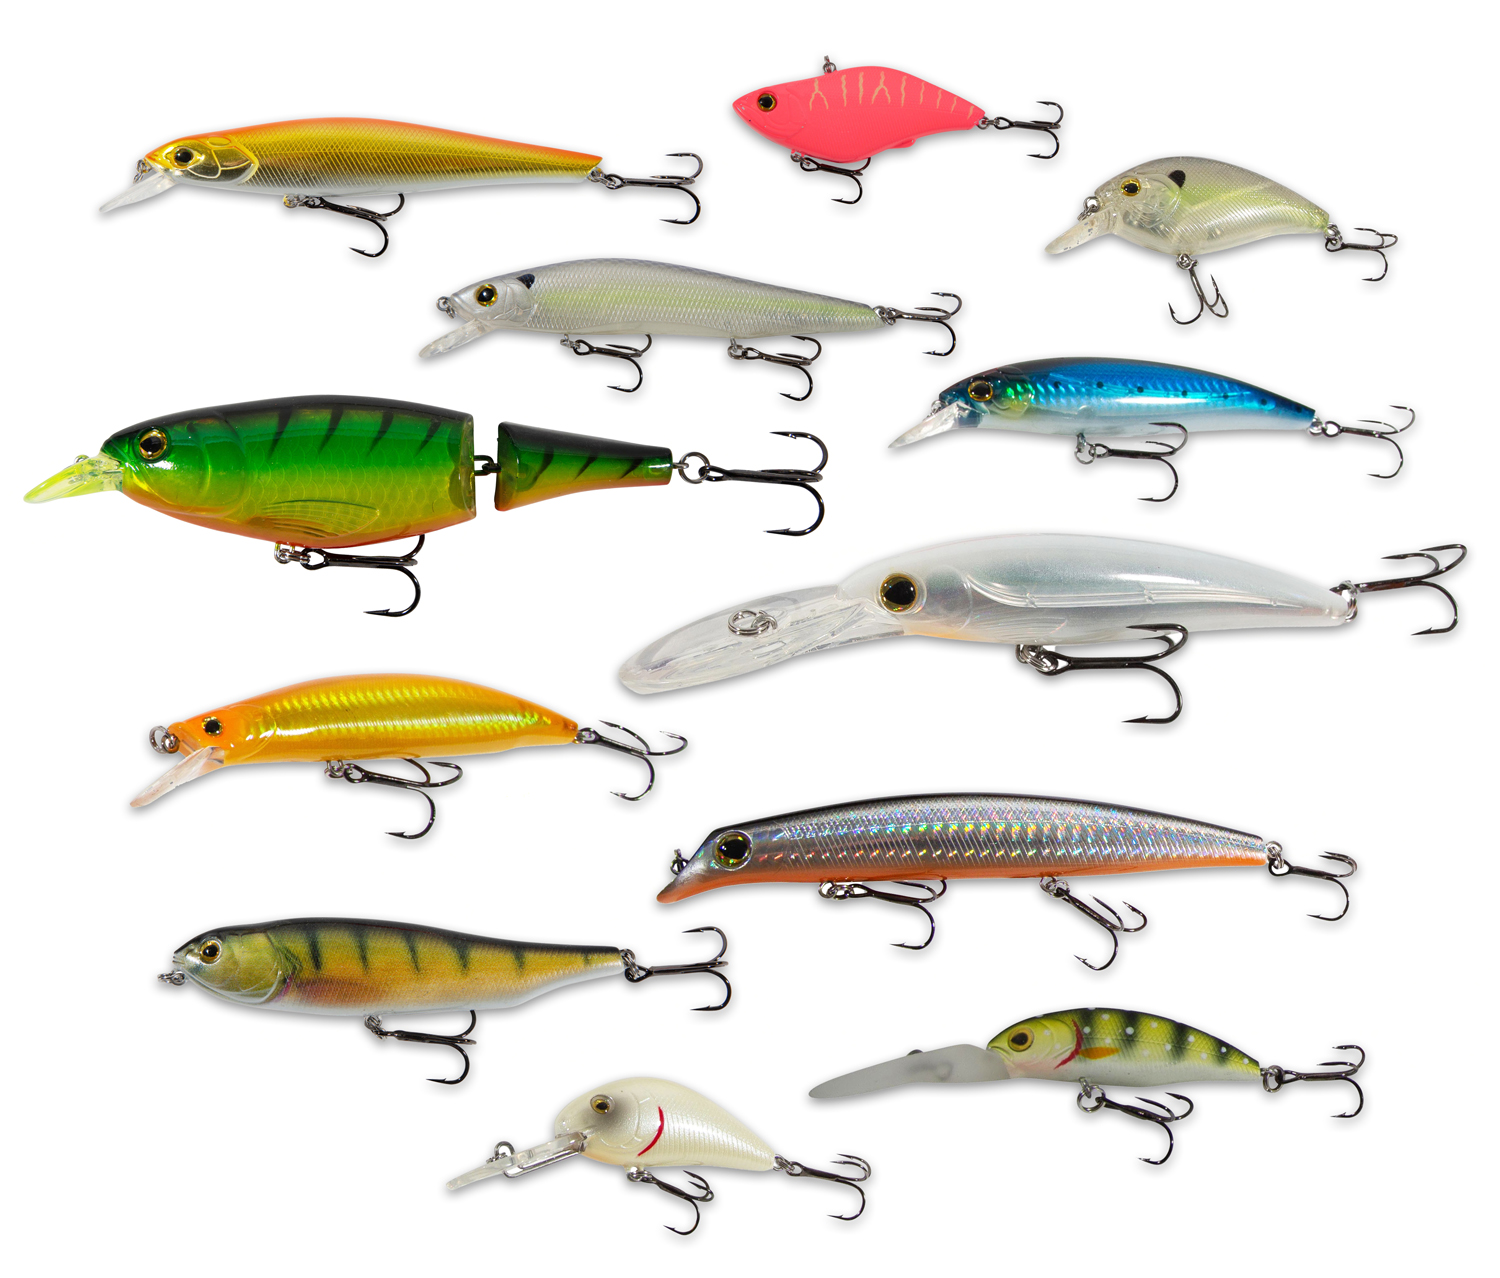 Hardlure Pack Met 12 Lures! - Lure Set A